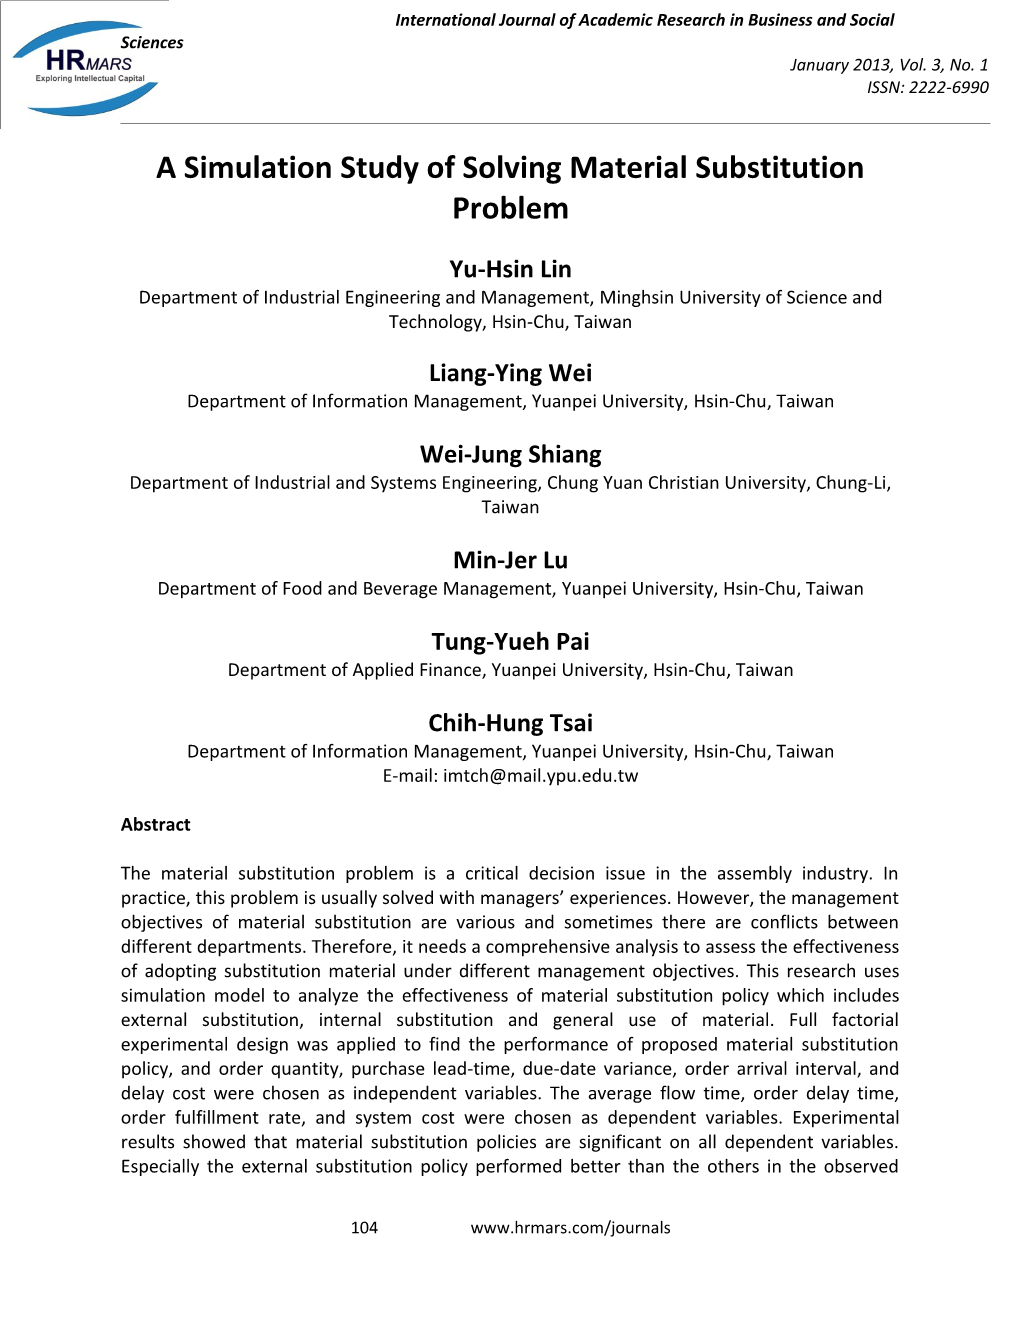 A Simulation Study of Solving Material Substitution Problem